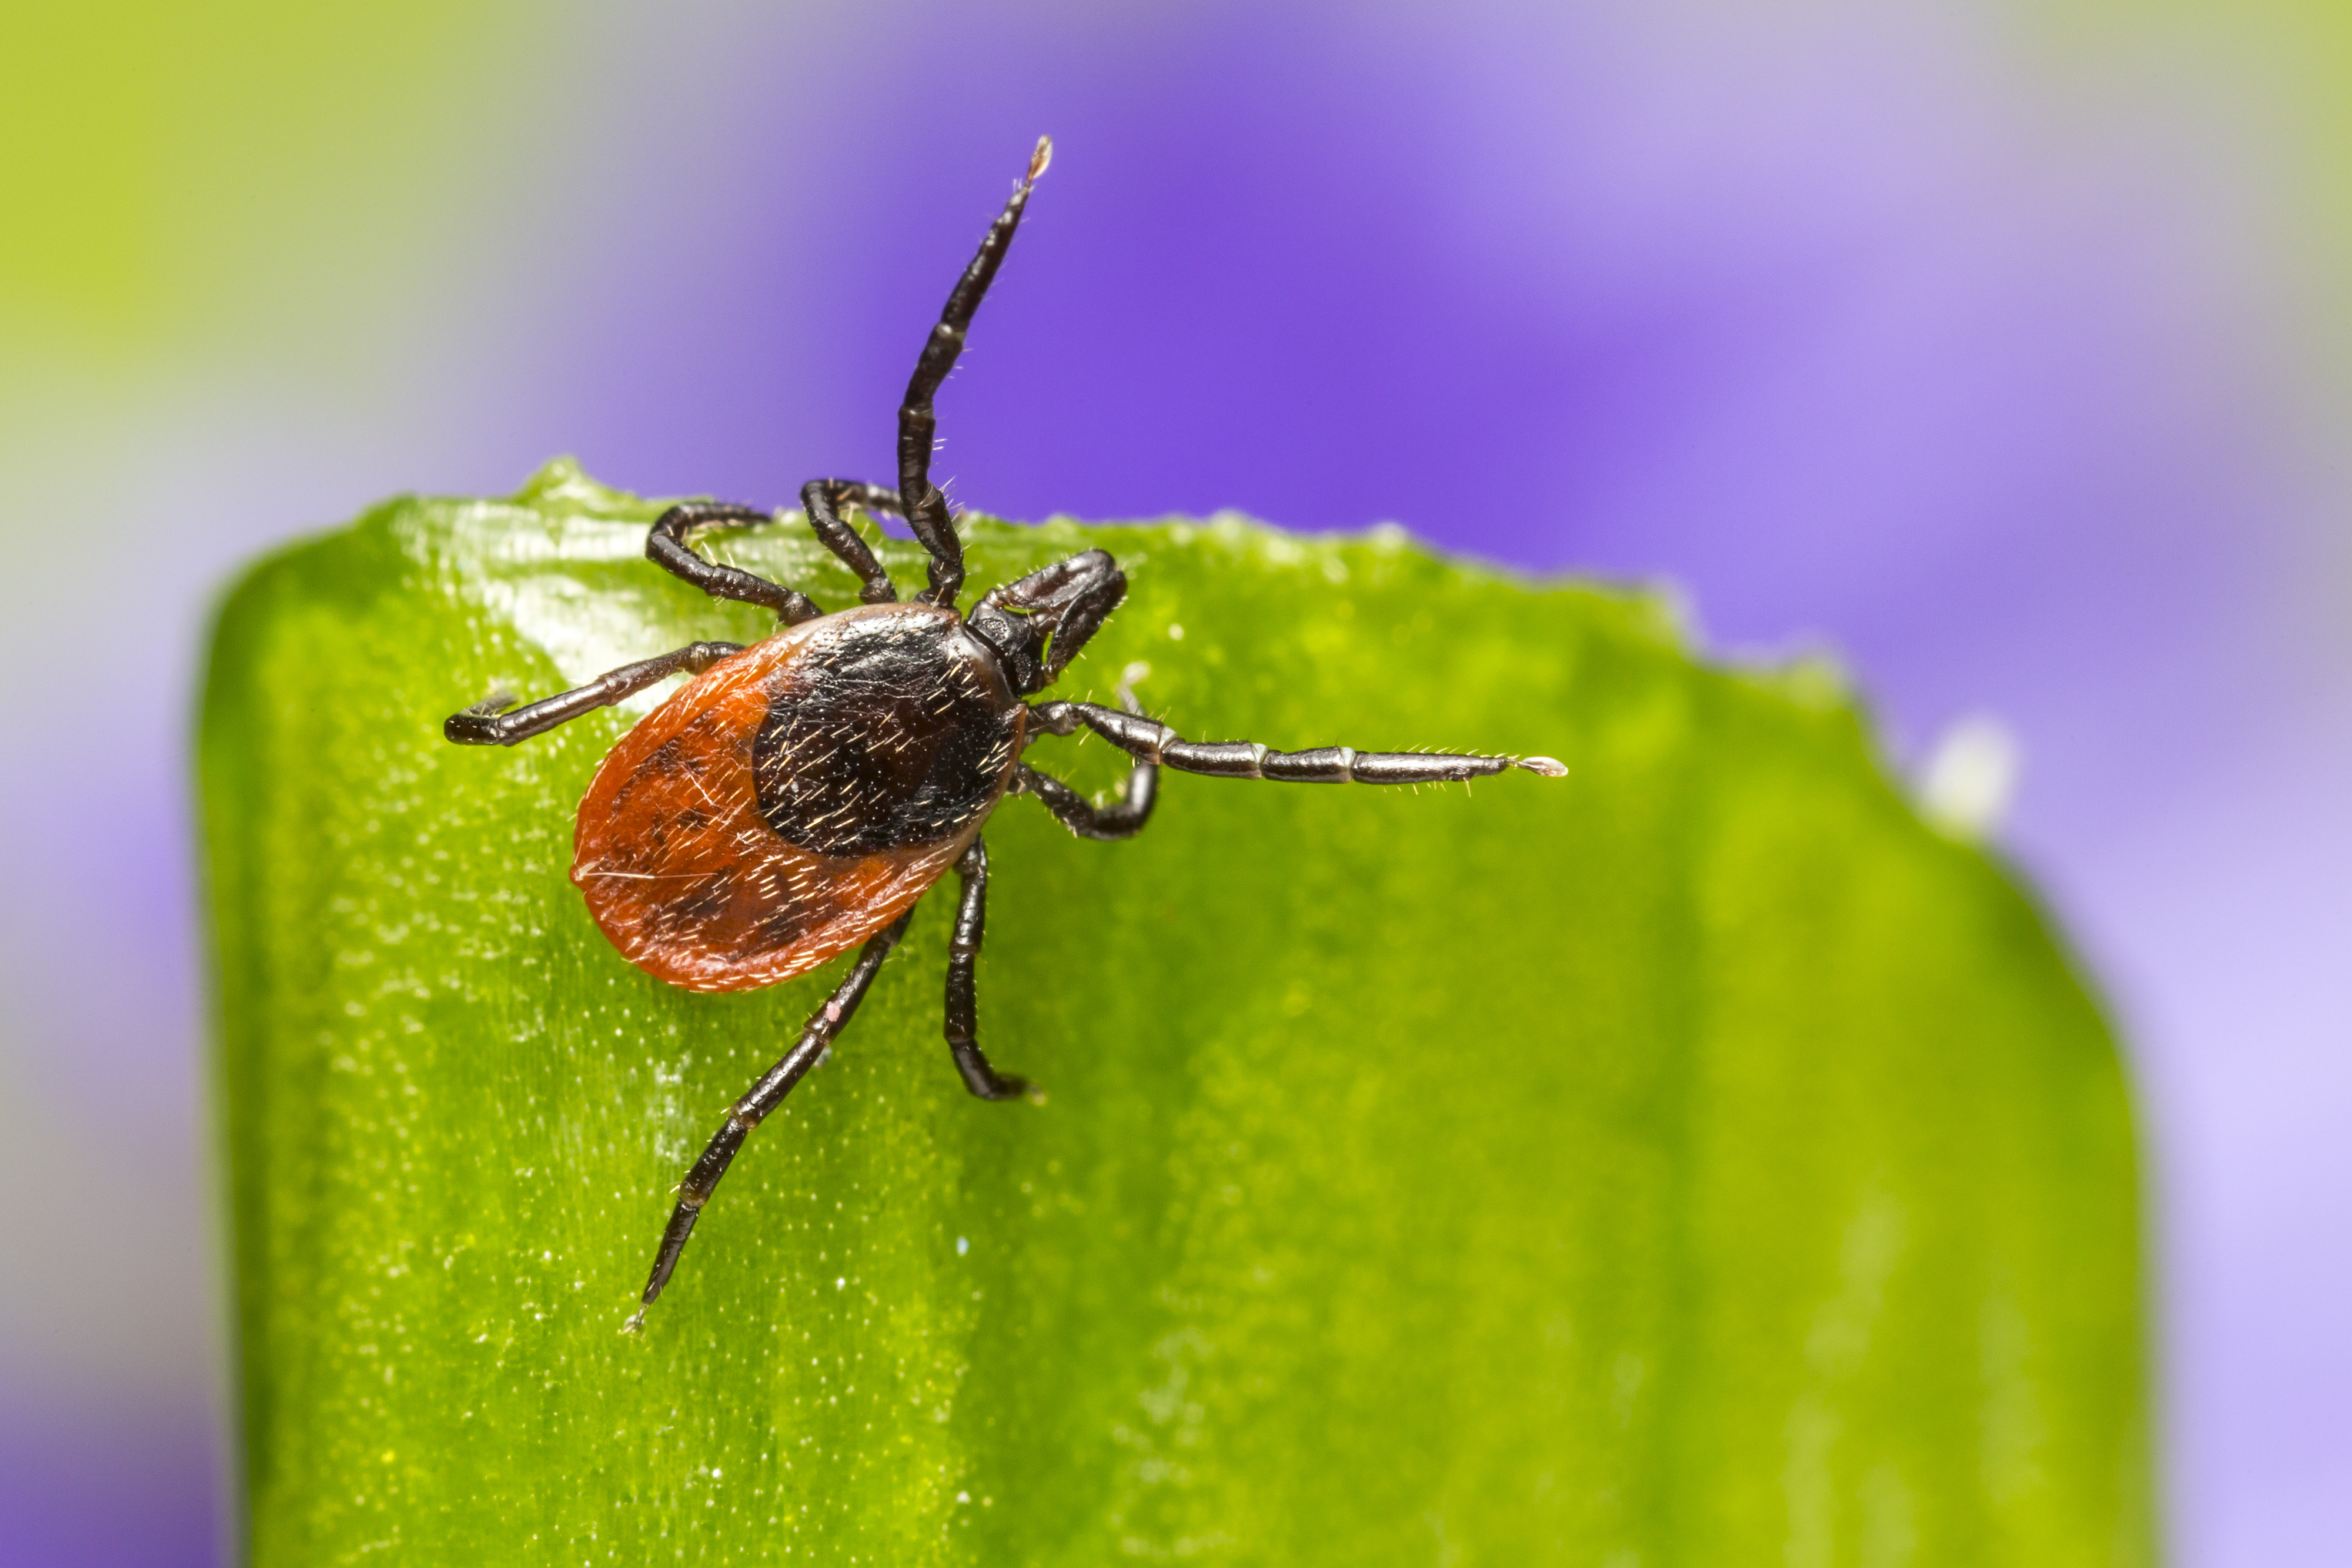 Tick sitting green leaf with purple background